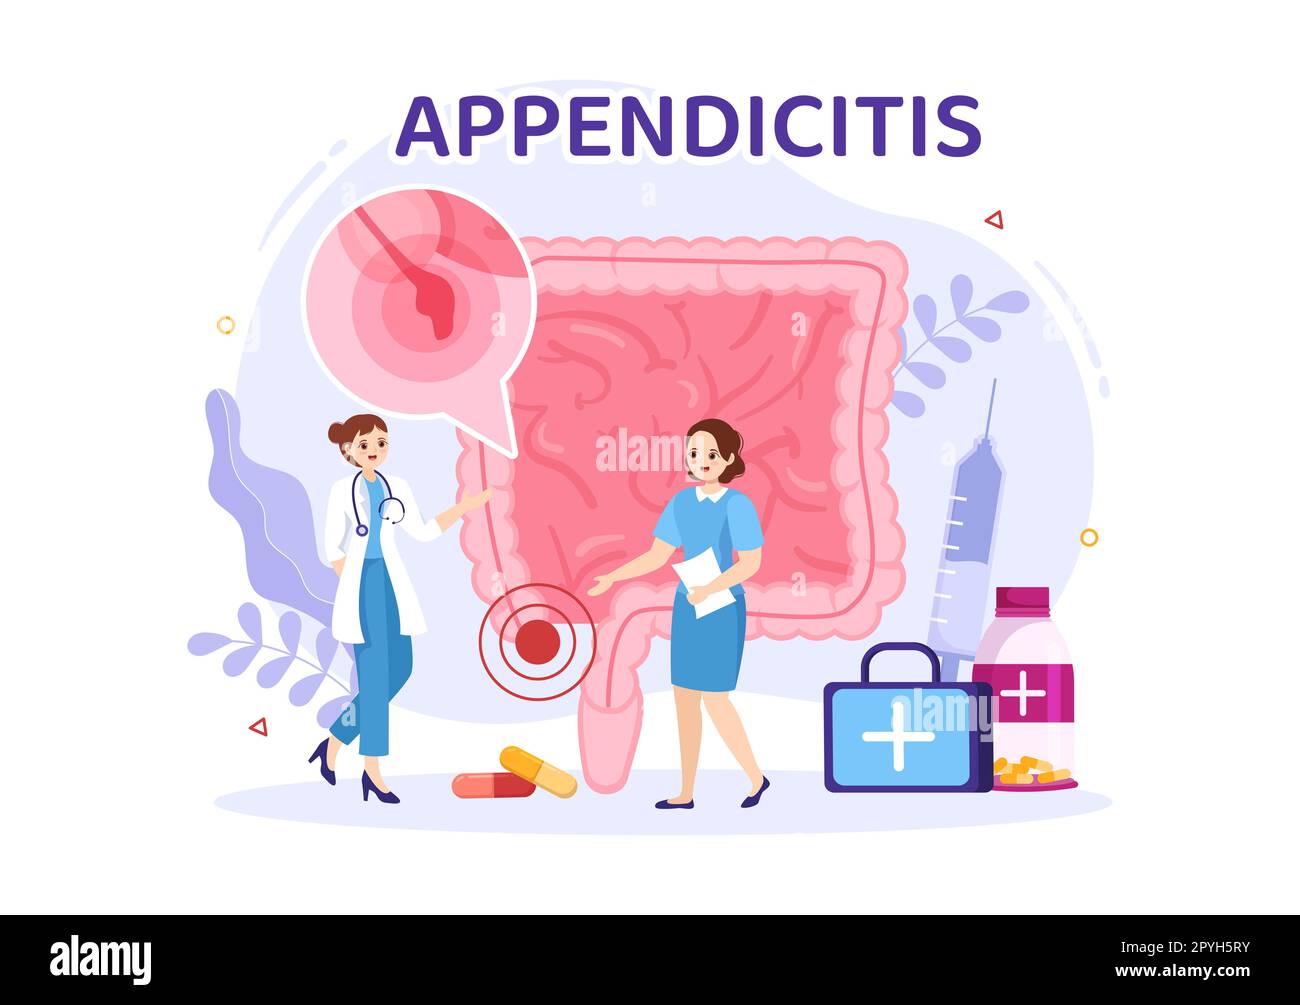 Appendicitis Illustration with Inflammation of the Appendix and Stomach Treatment in Healthcare Flat Cartoon Hand Drawn for Landing Page Templates Stock Photo